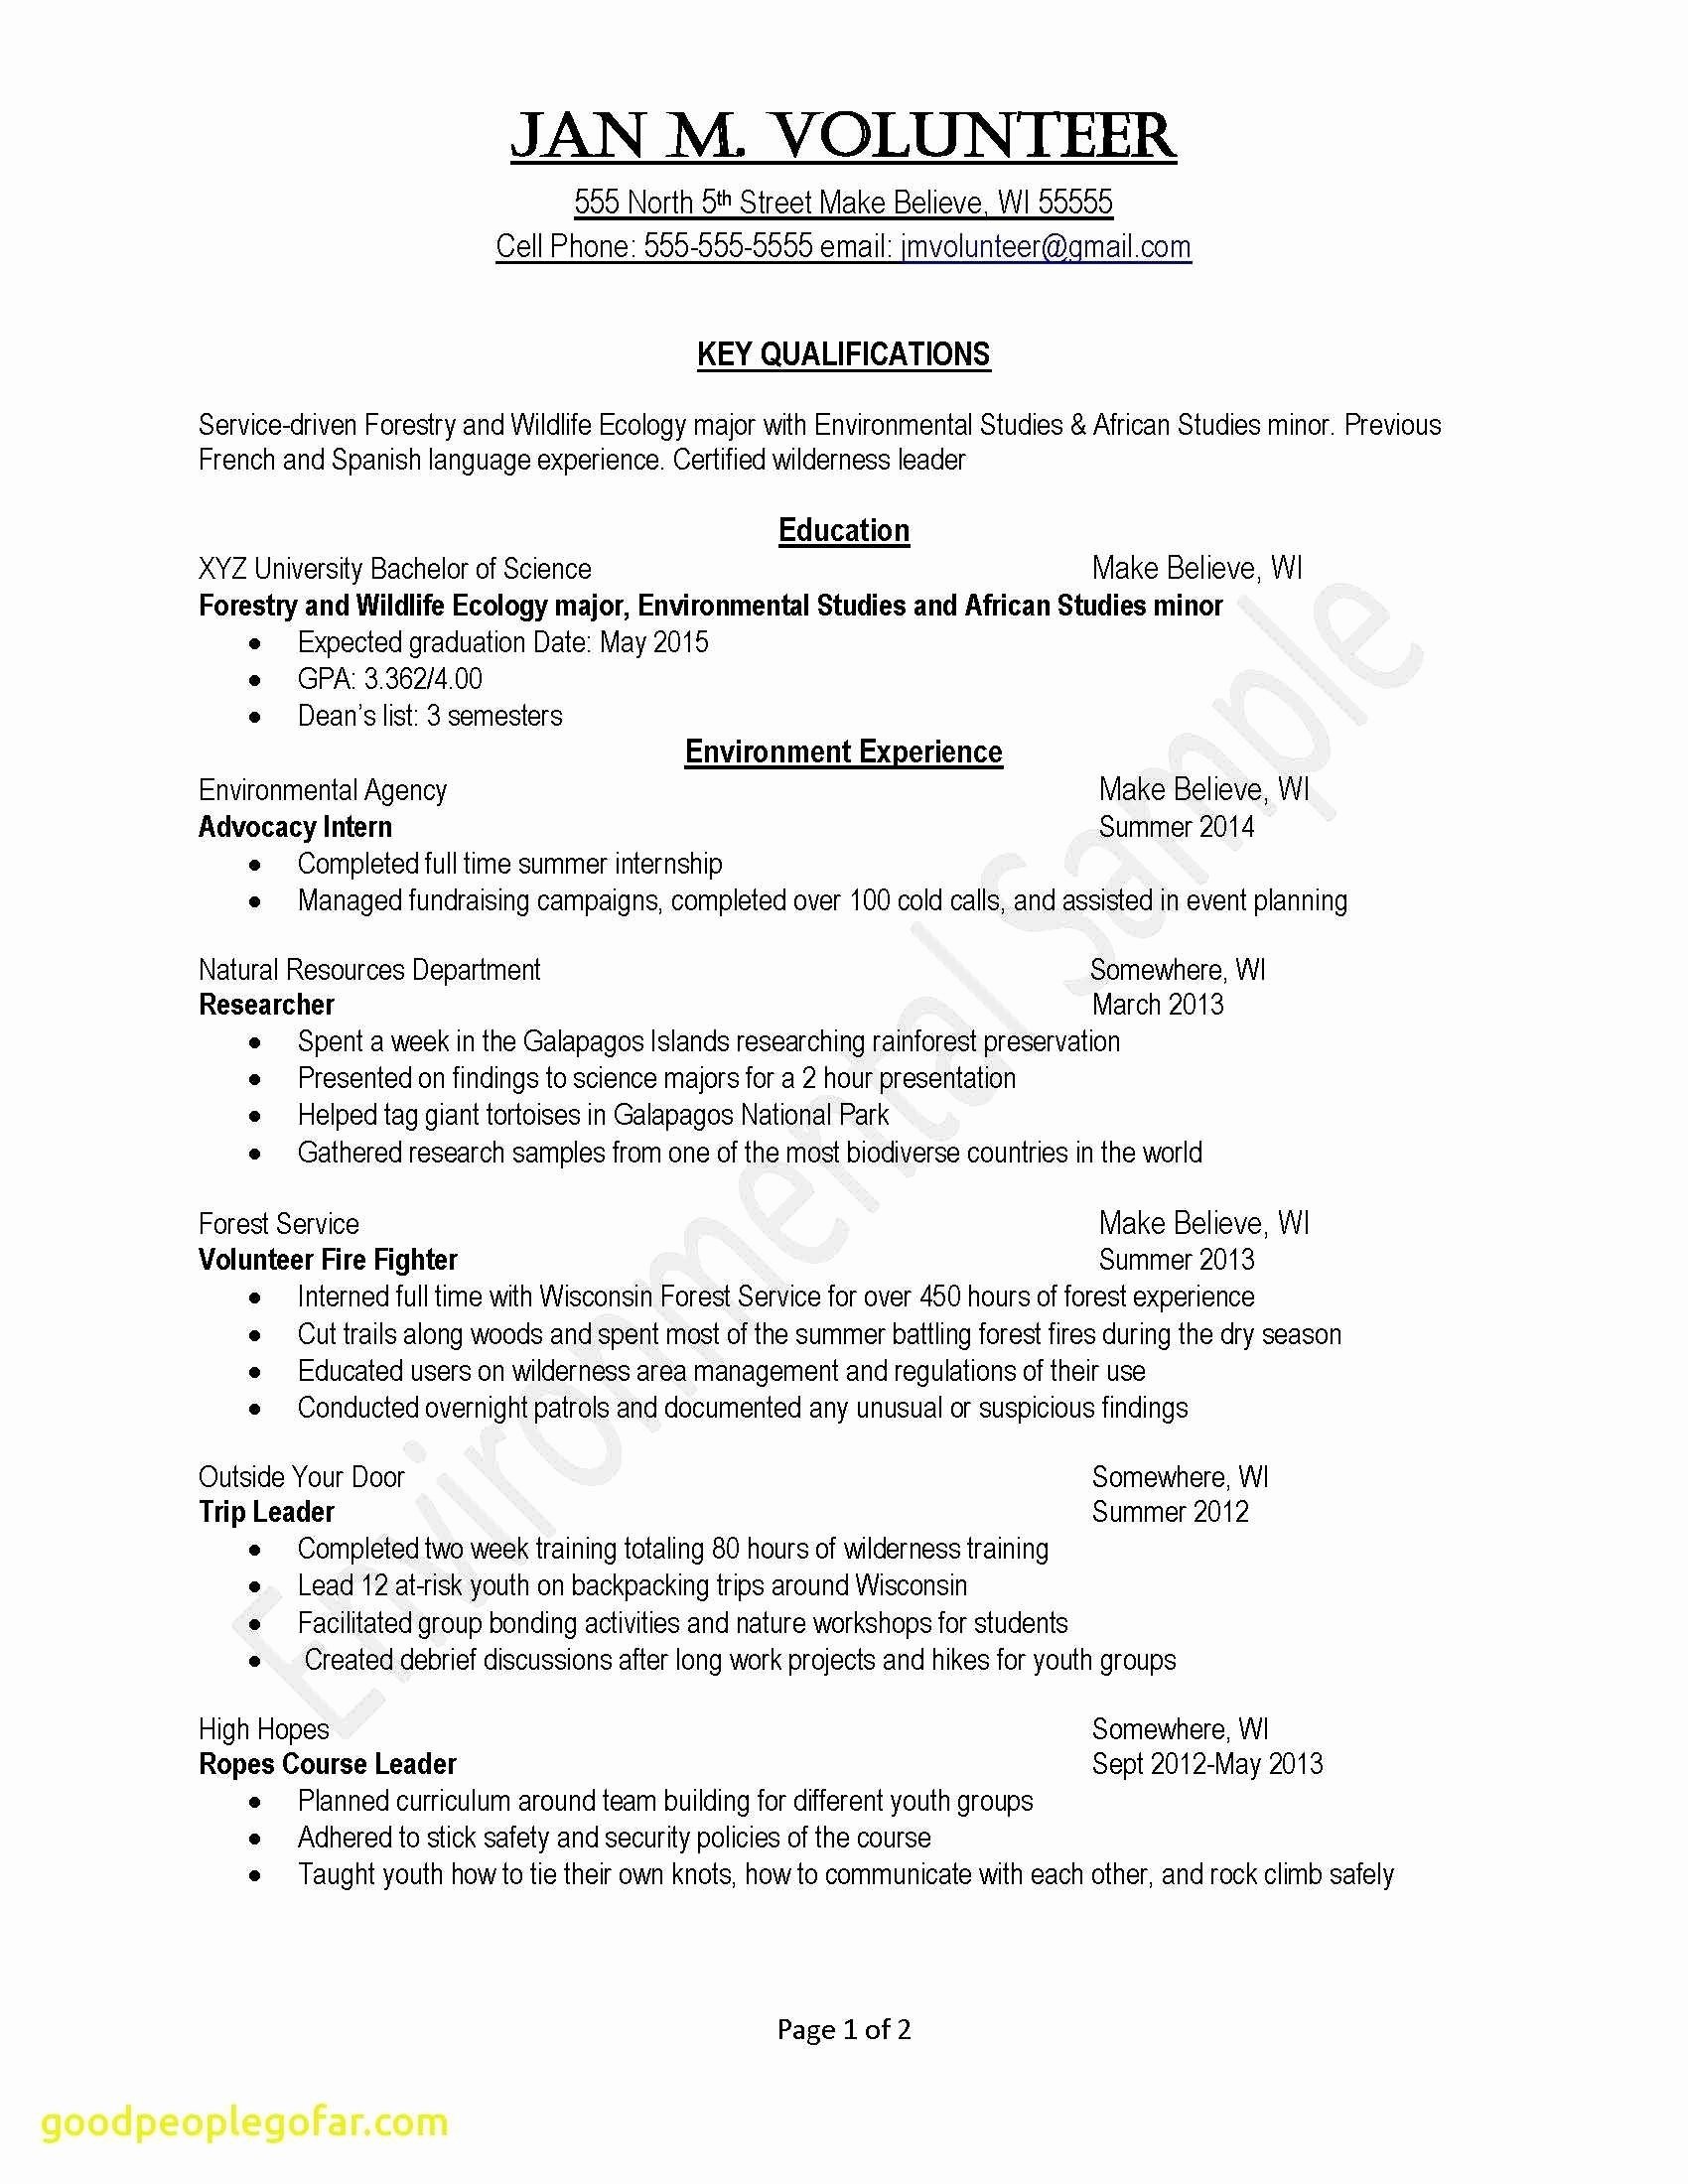 Fix My Resume Services Examples Customer Service Resume